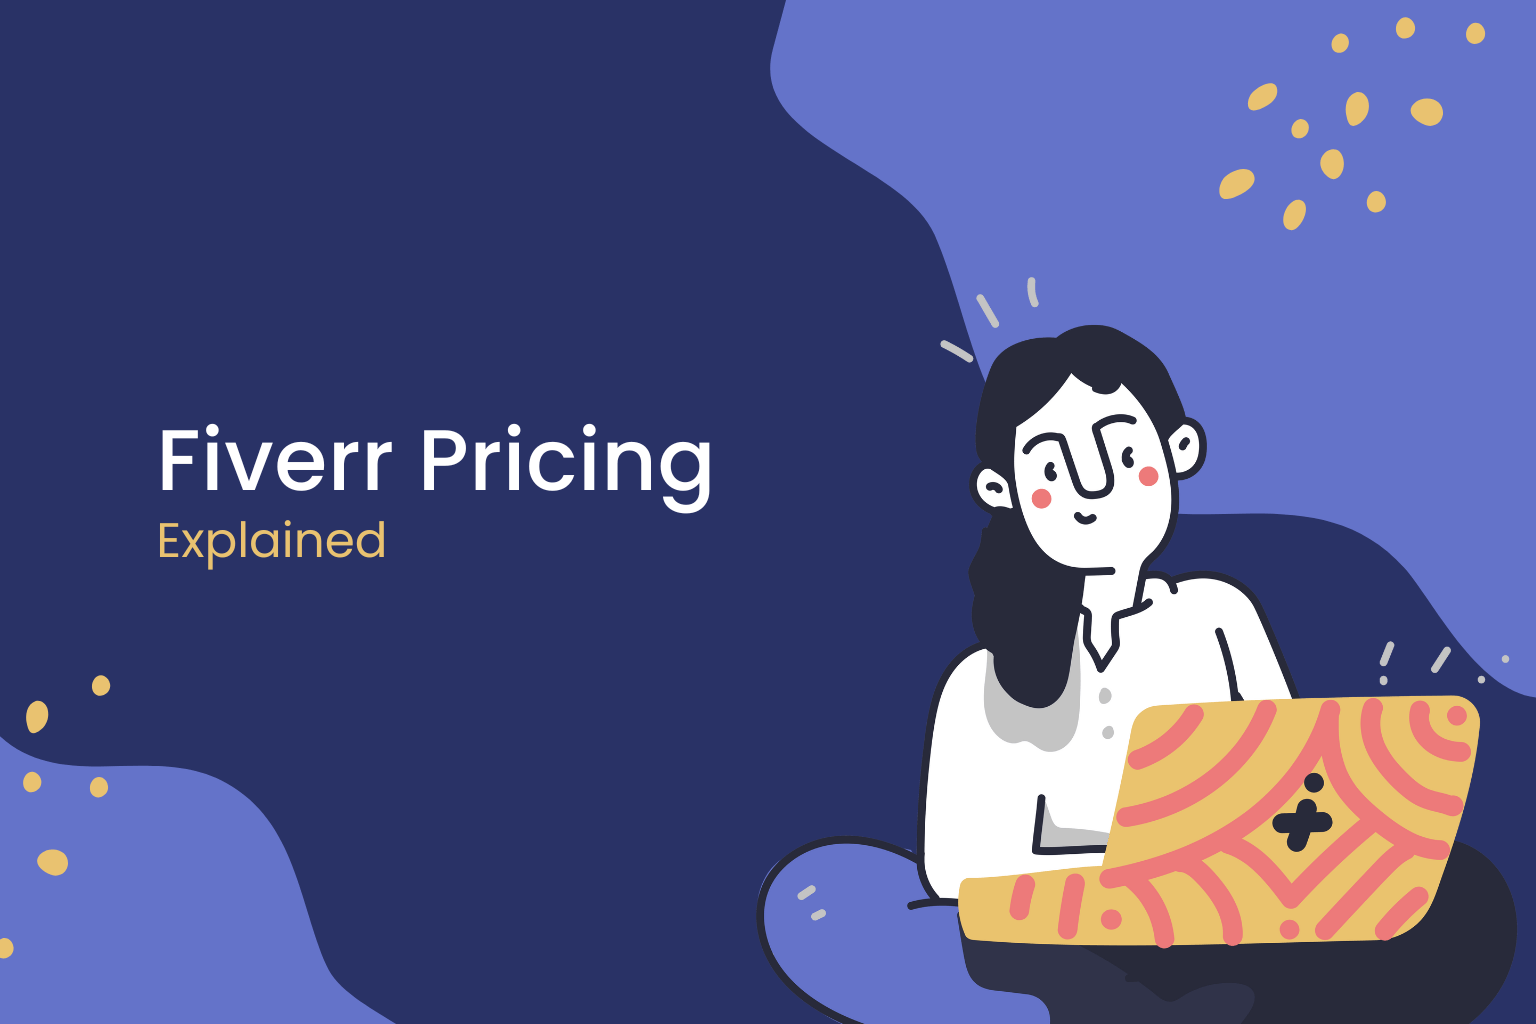 Fiverr Pricing Explained